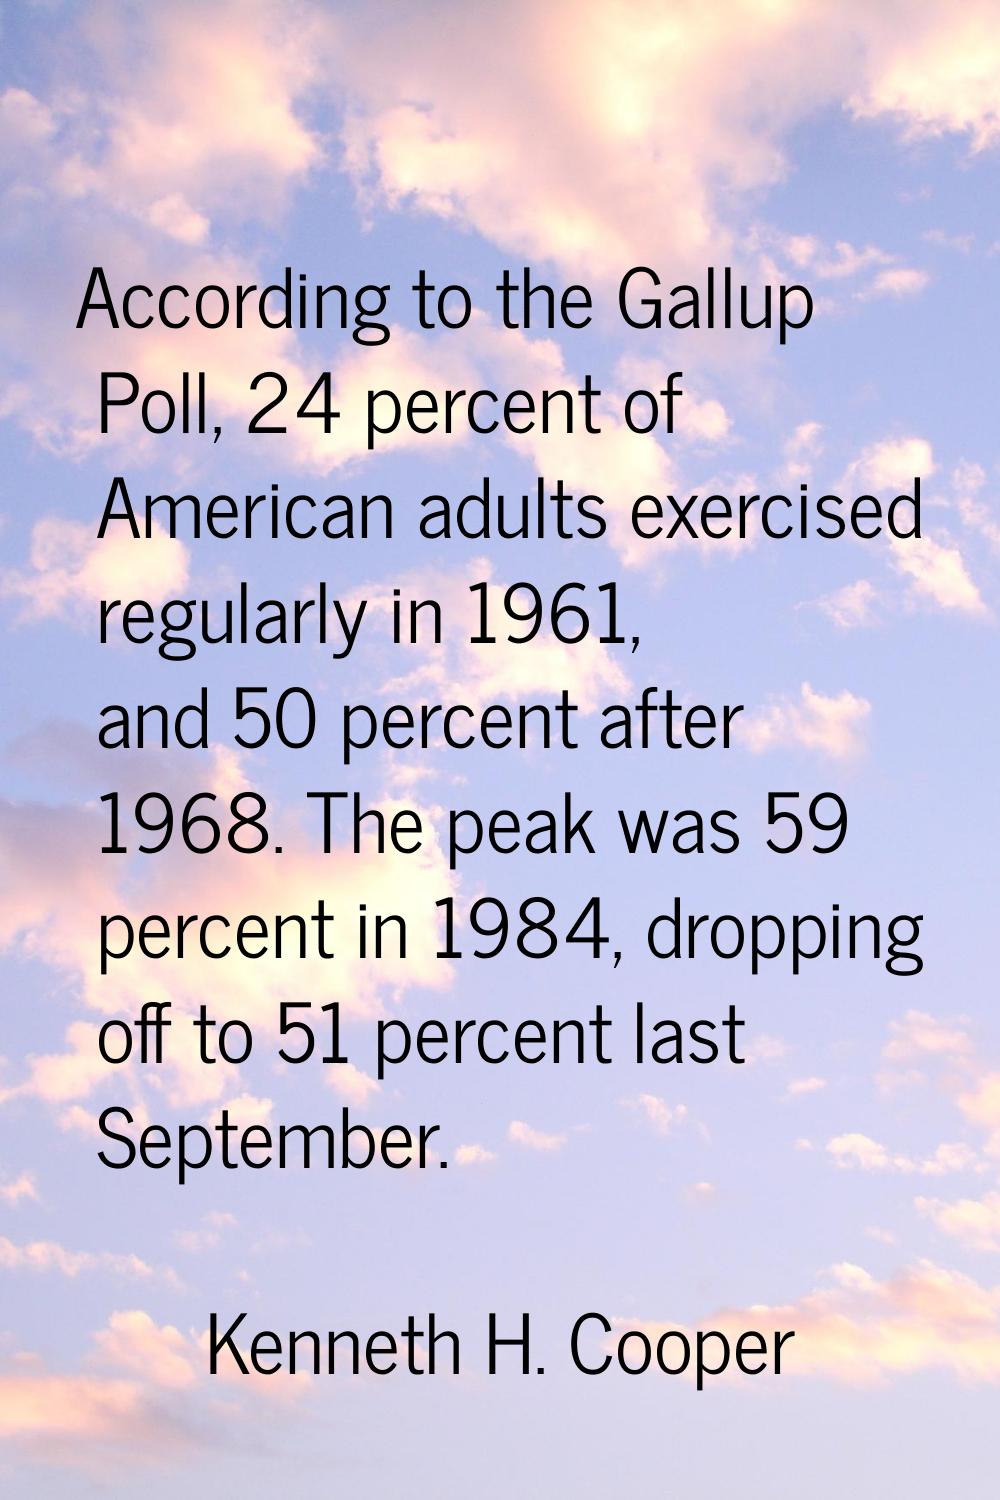 According to the Gallup Poll, 24 percent of American adults exercised regularly in 1961, and 50 per